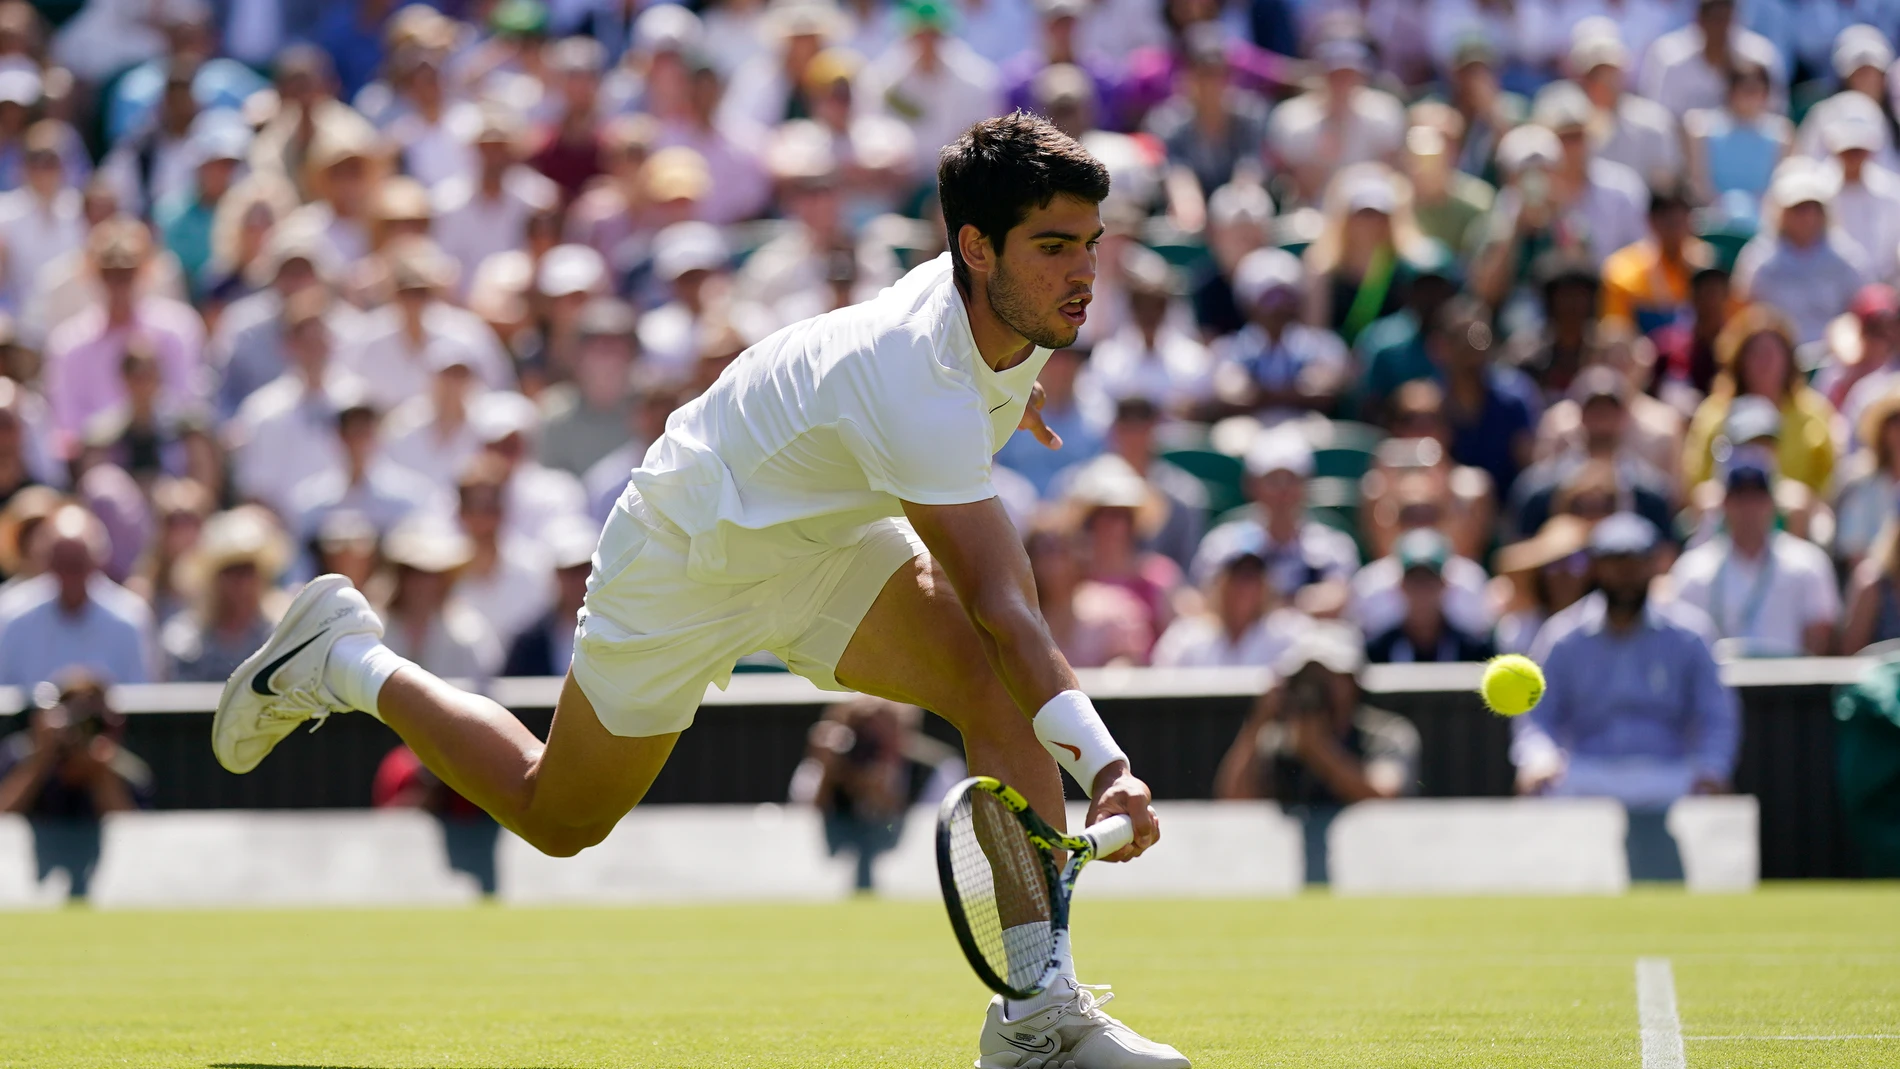 Spain's Carlos Alcaraz returns to Alexandre Muller of France in a men's singles match on day five of the Wimbledon tennis championships in London, Friday, July 7, 2023. (AP Photo/Alberto Pezzali)